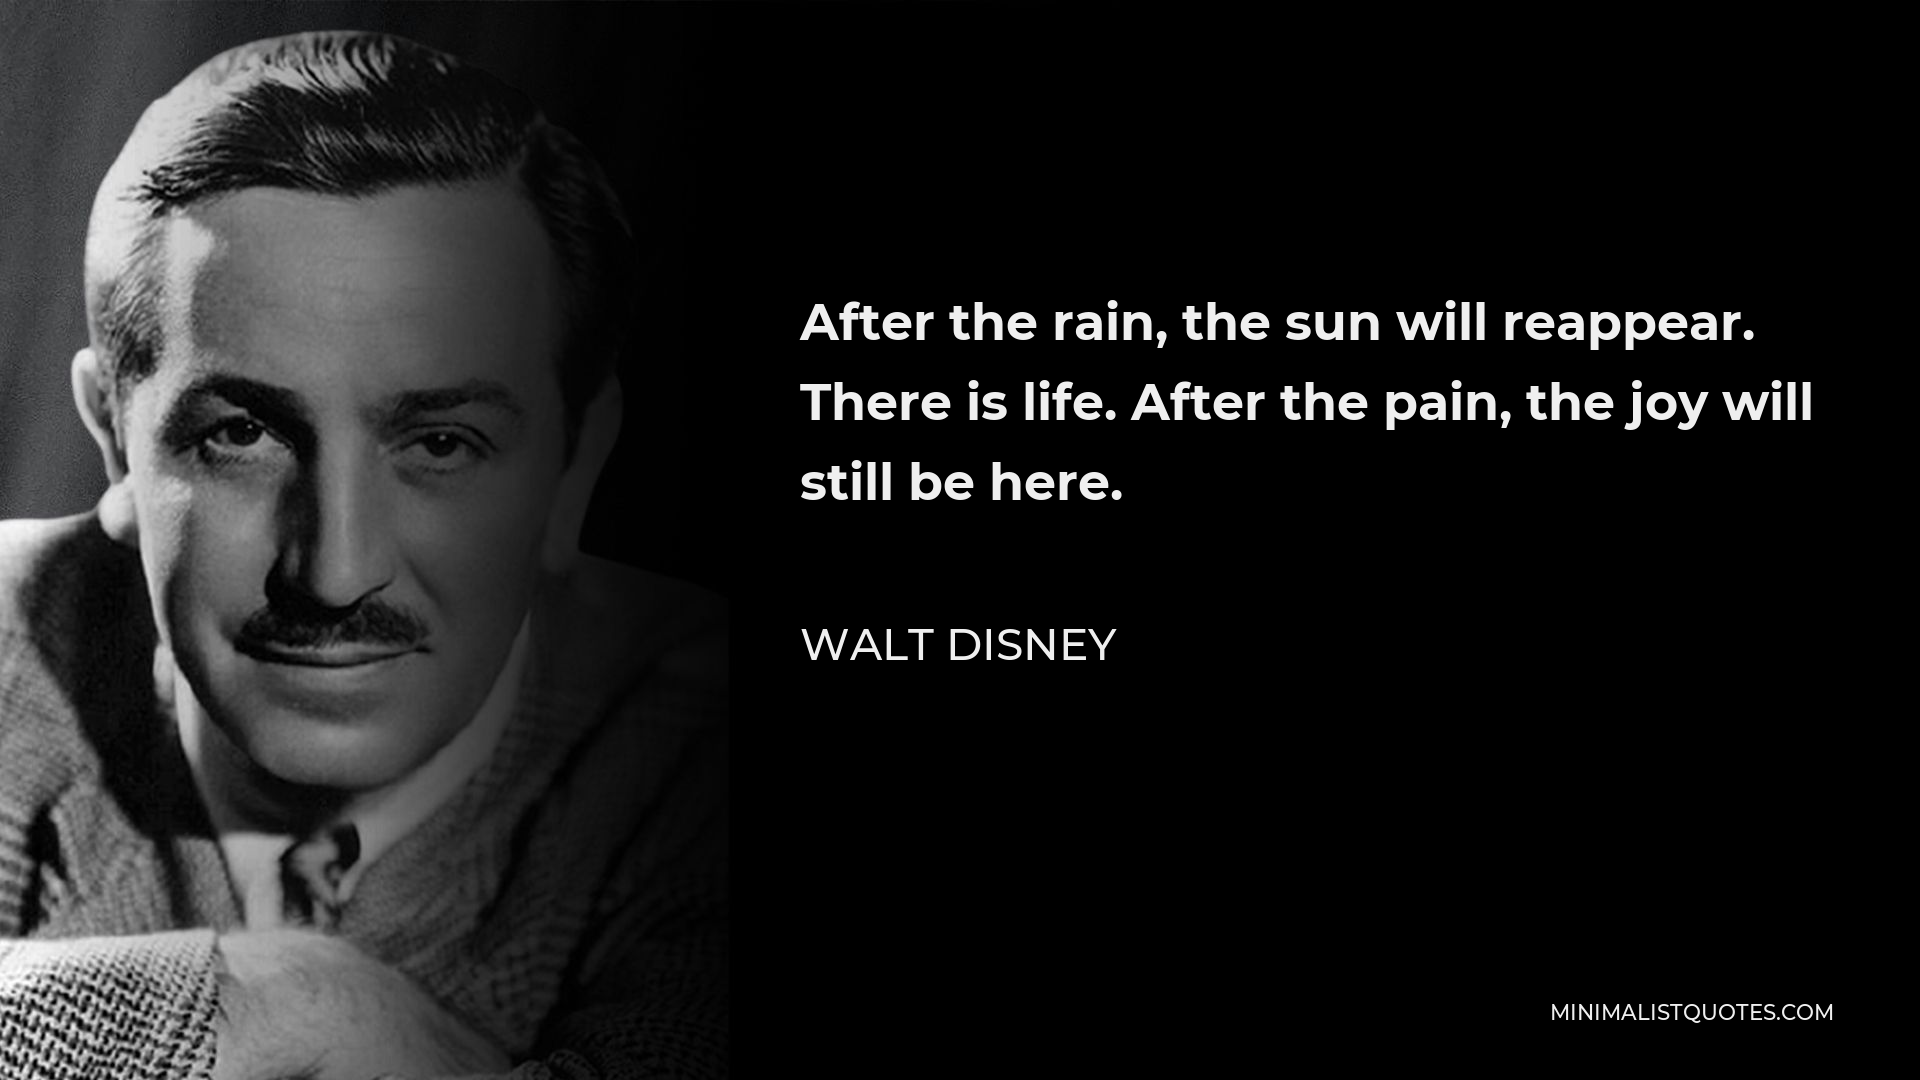 Walt Disney Quote - After the rain, the sun will reappear. There is life. After the pain, the joy will still be here.